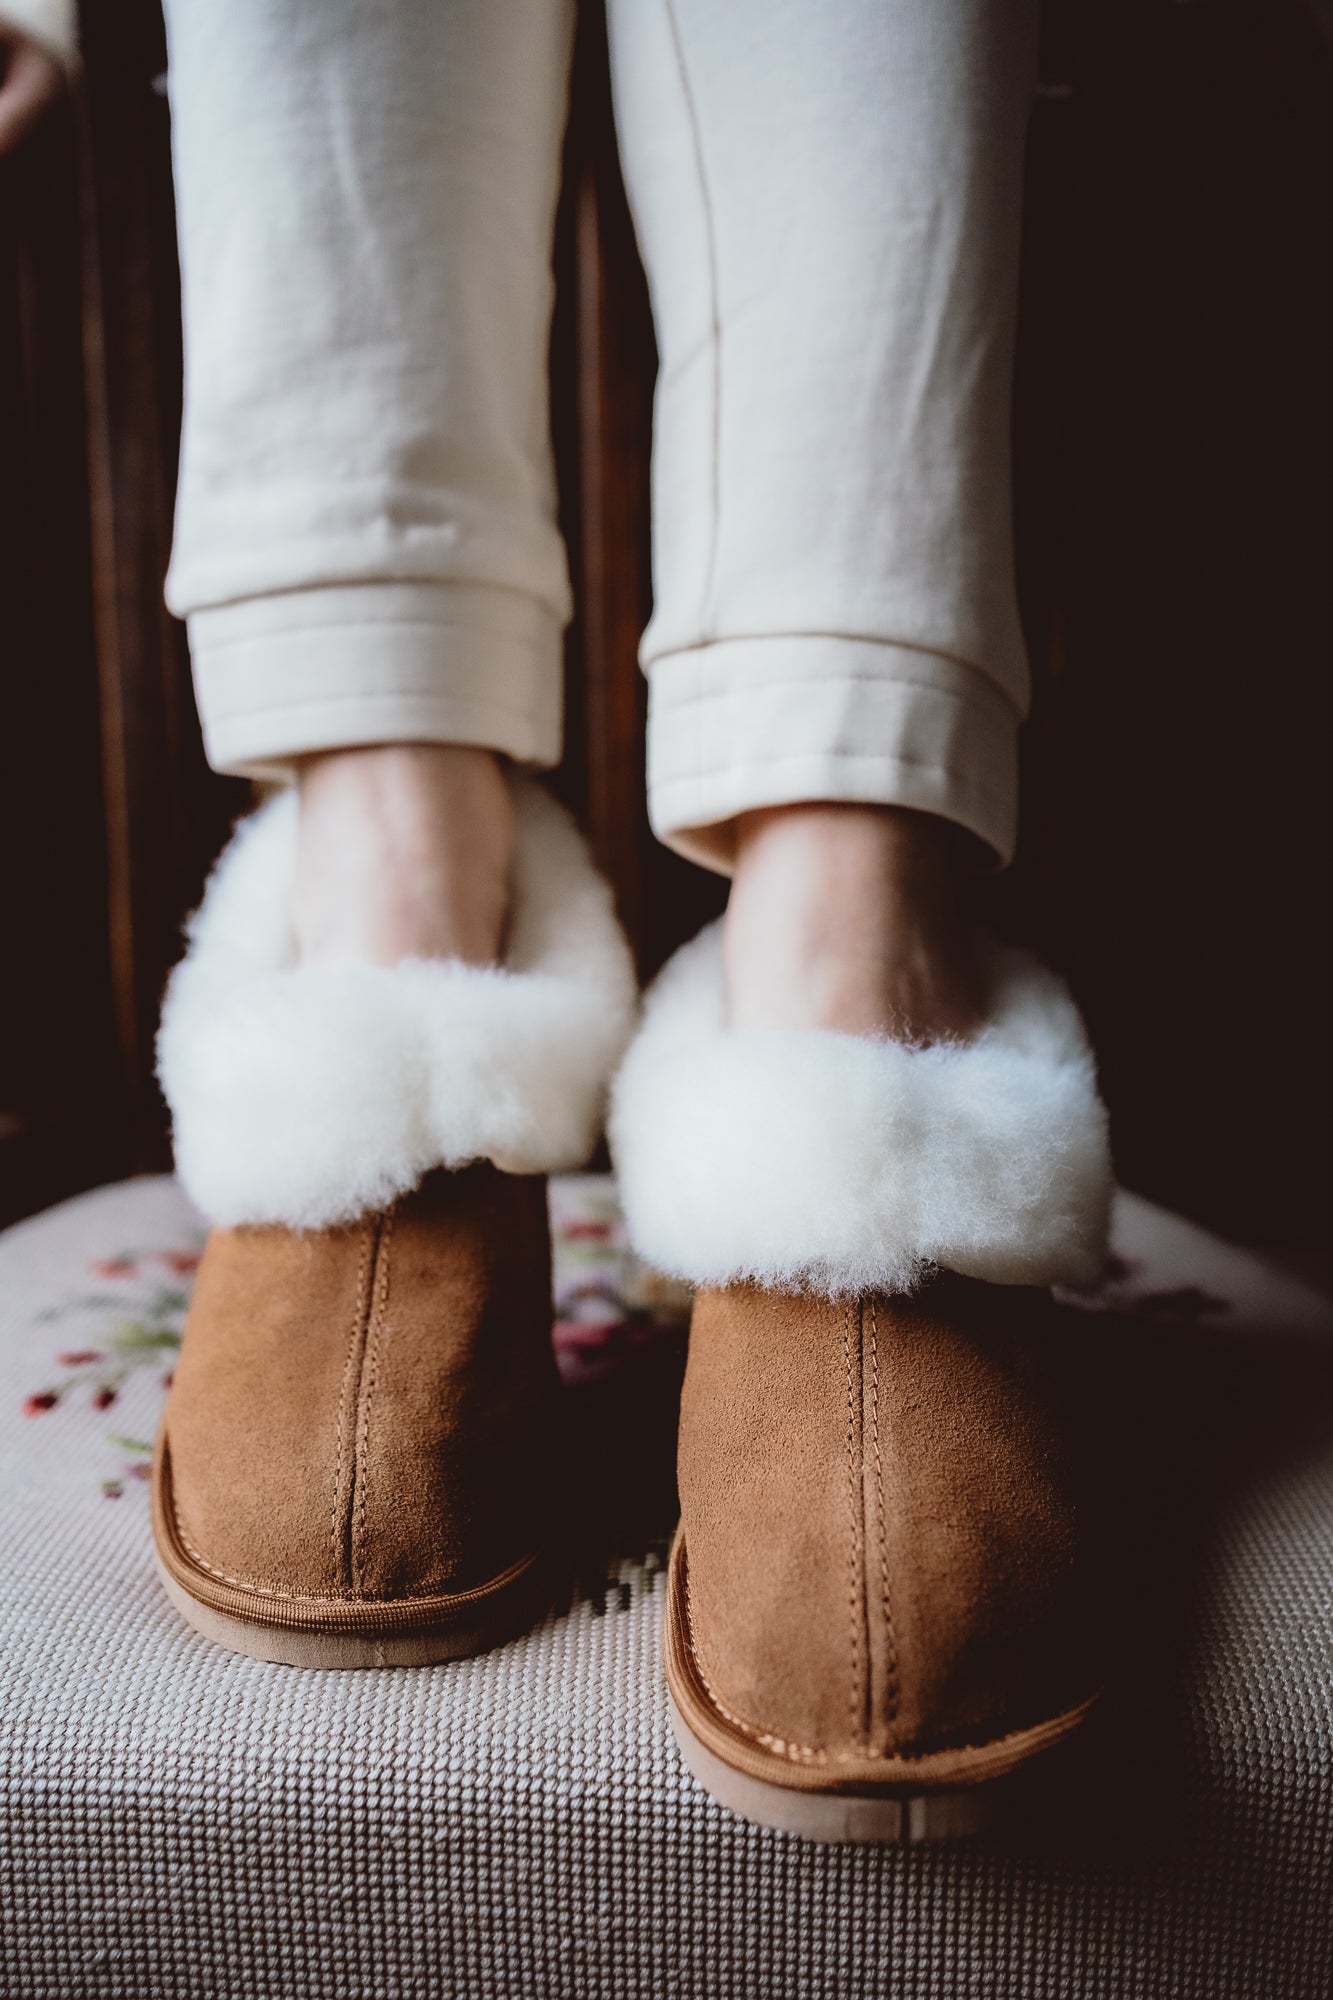 Classic sheepskin slippers with white fur, worn by a woman and placed on a hand-embroidered chair.